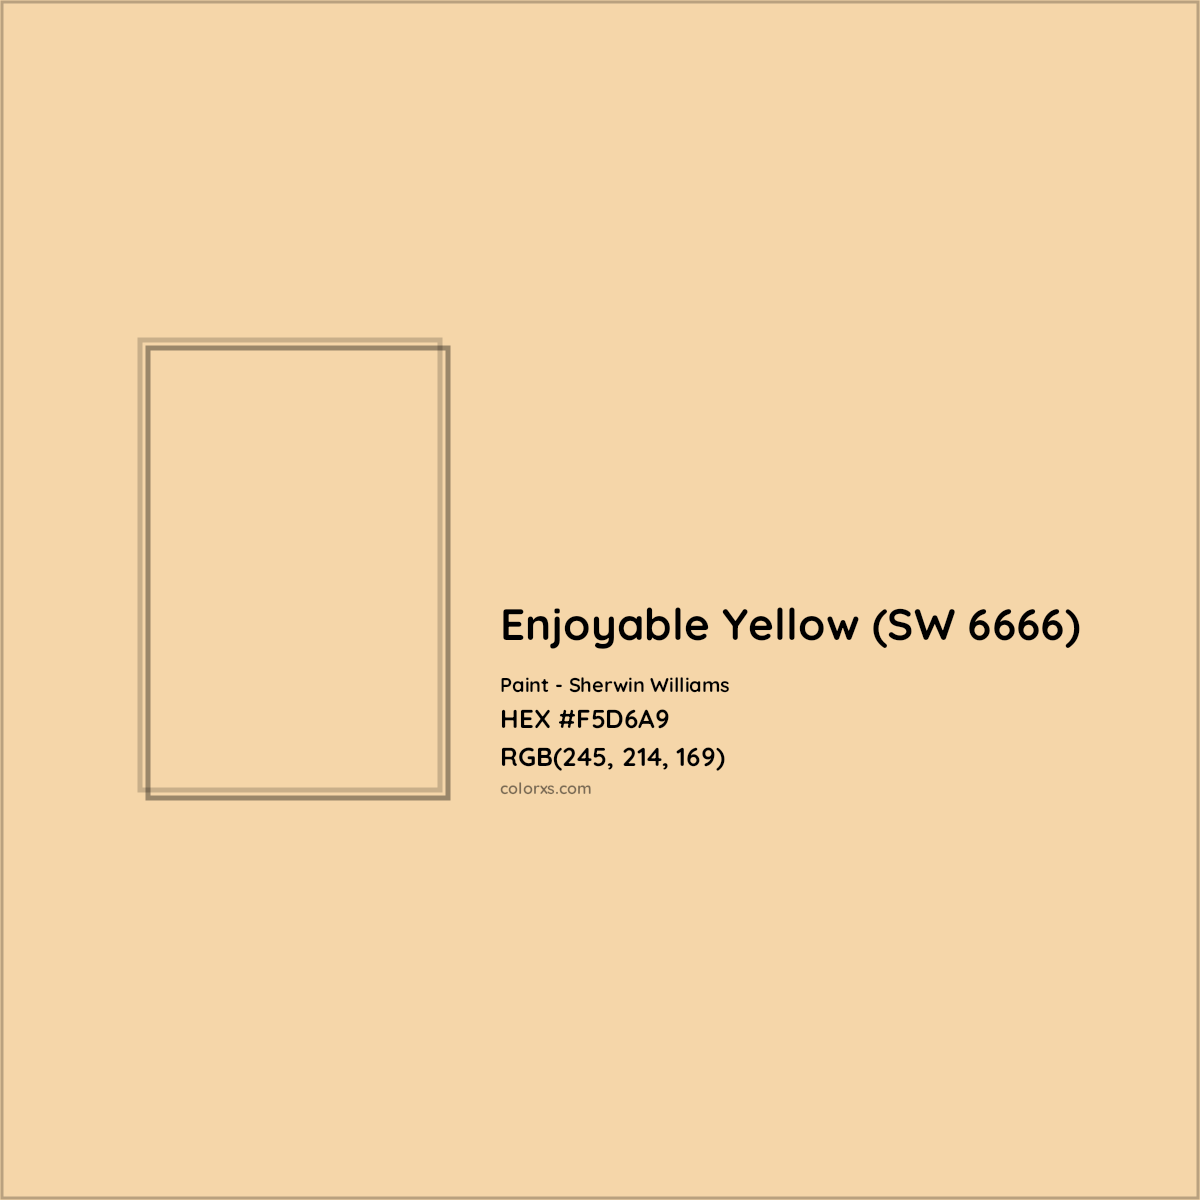 HEX #F5D6A9 Enjoyable Yellow (SW 6666) Paint Sherwin Williams - Color Code